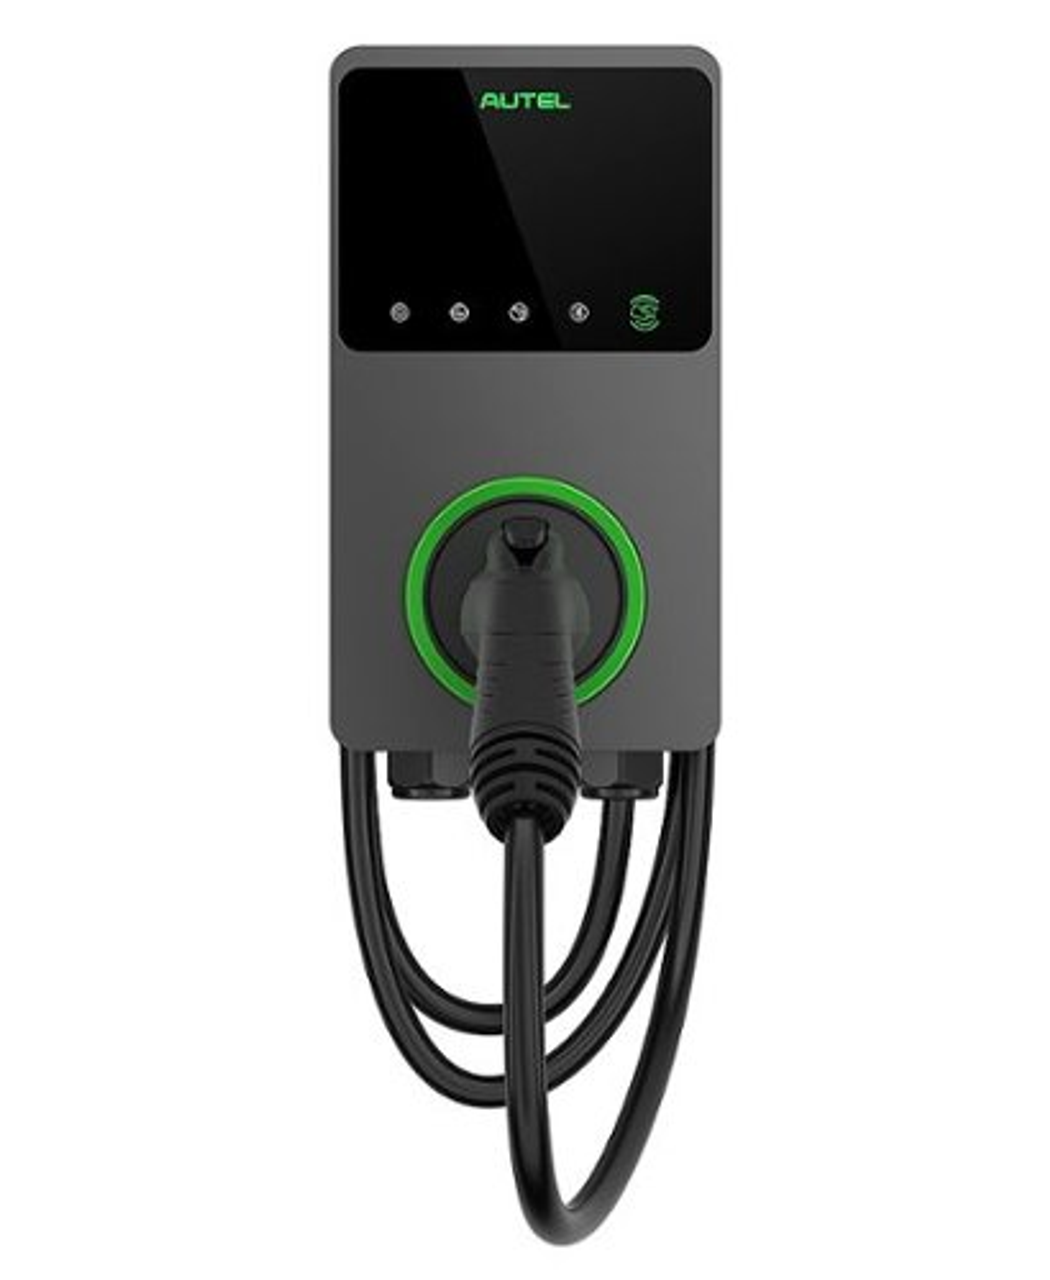 Autel - Residential EV Charger 50A In-Body Holster - Dark Gray